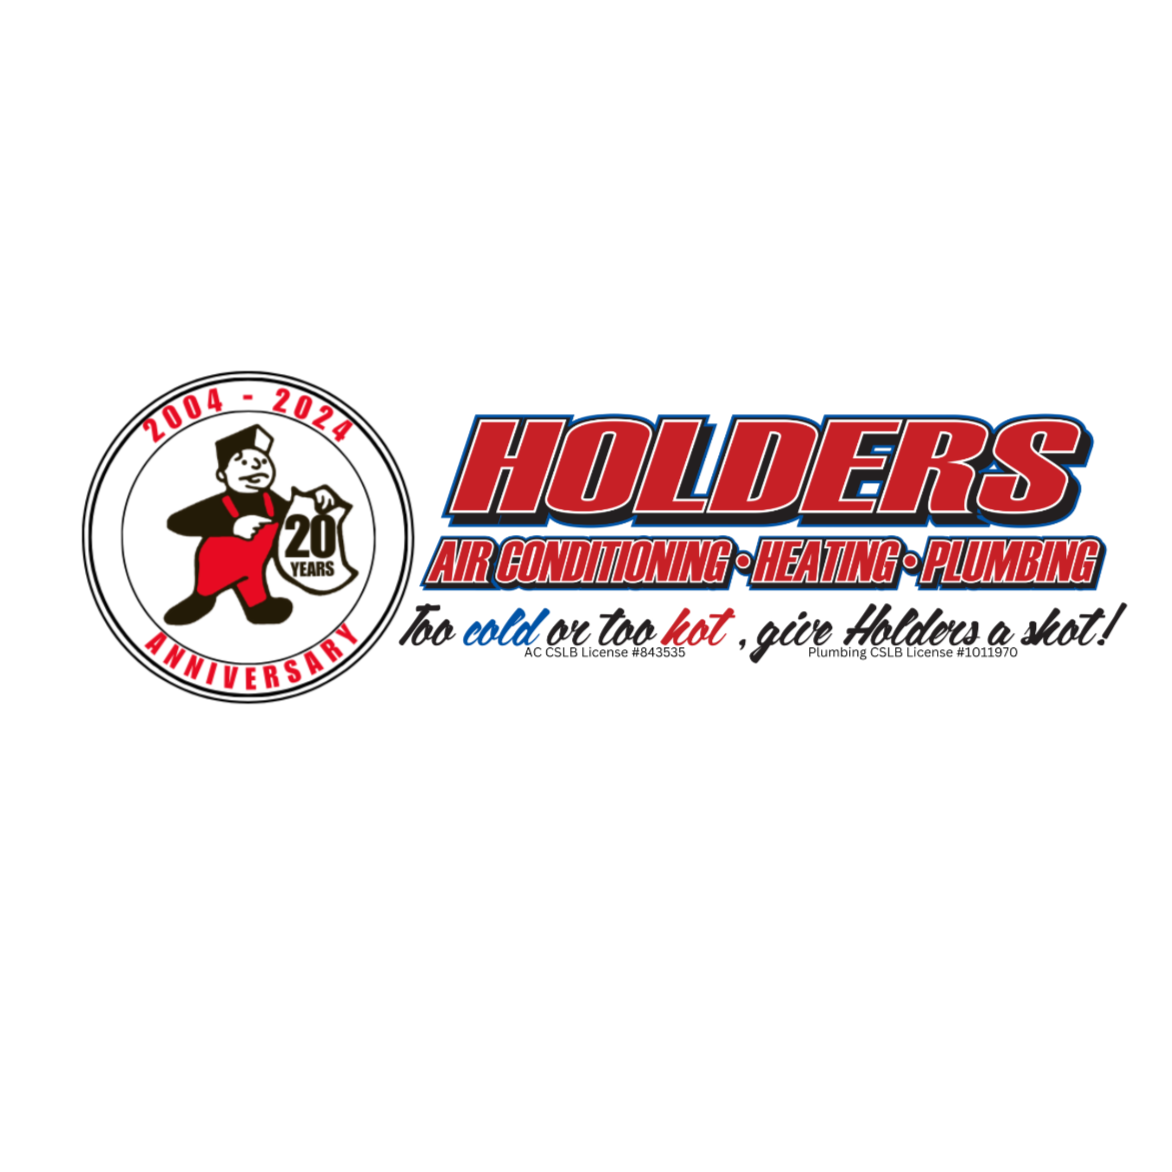 Holders Air Conditioning & Heating - Bakersfield, CA 93308 - (661)864-1925 | ShowMeLocal.com